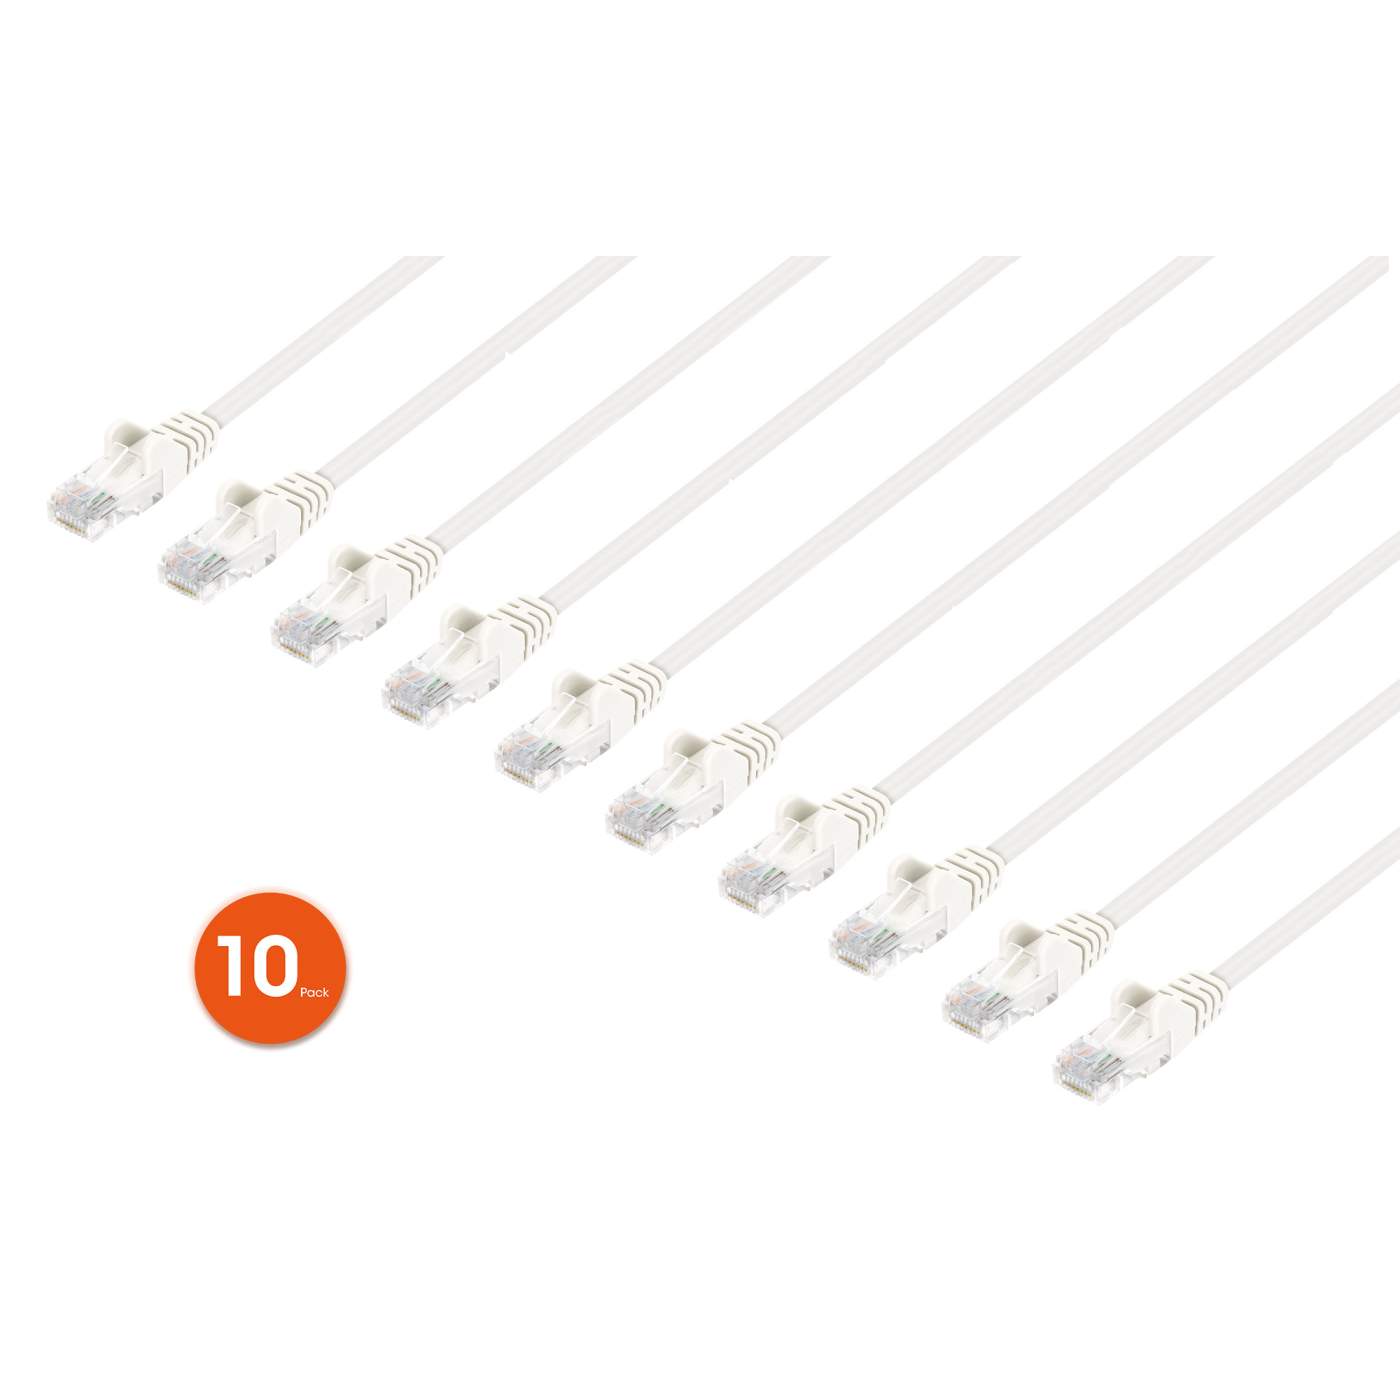 Cat6 U/UTP Slim Network Patch Cable, 14 ft., White, 10-Pack Image 1